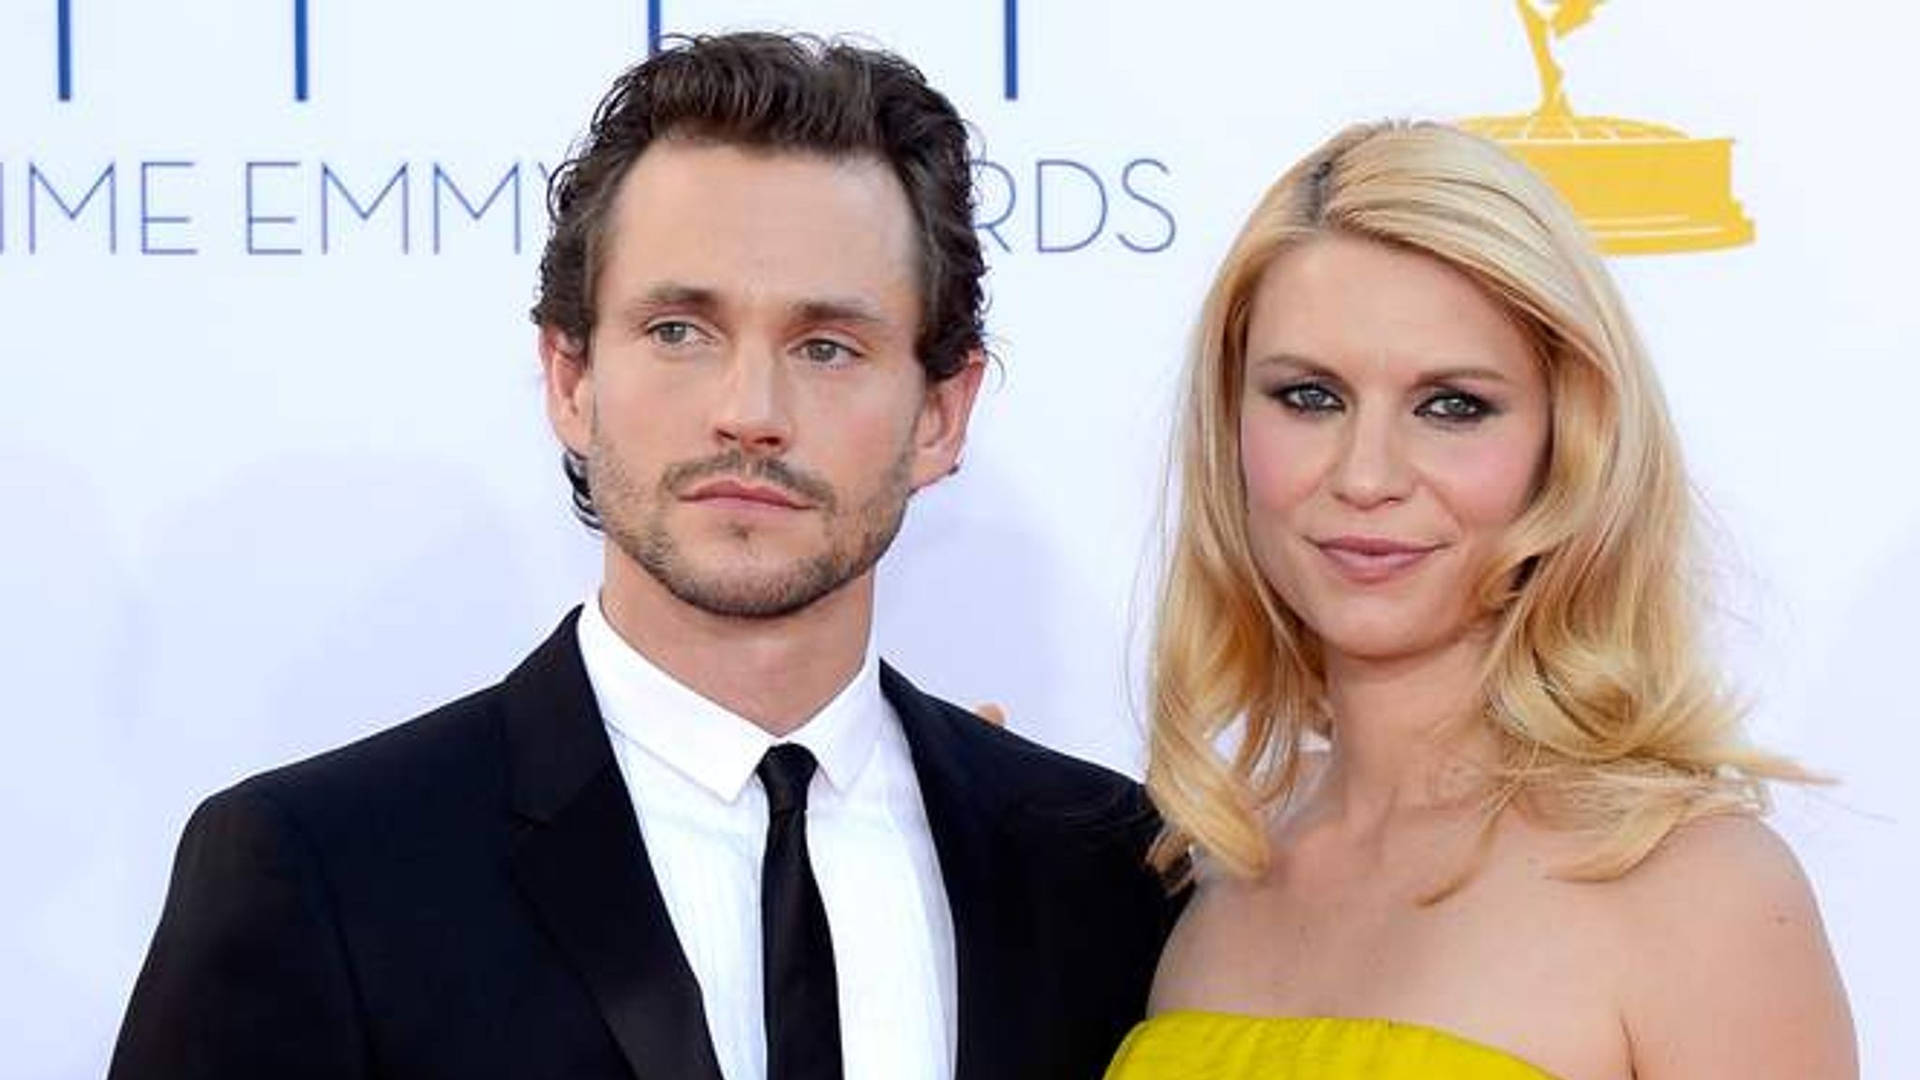 Claire Danes And Hugh Dancy In Emmys 2012 Background